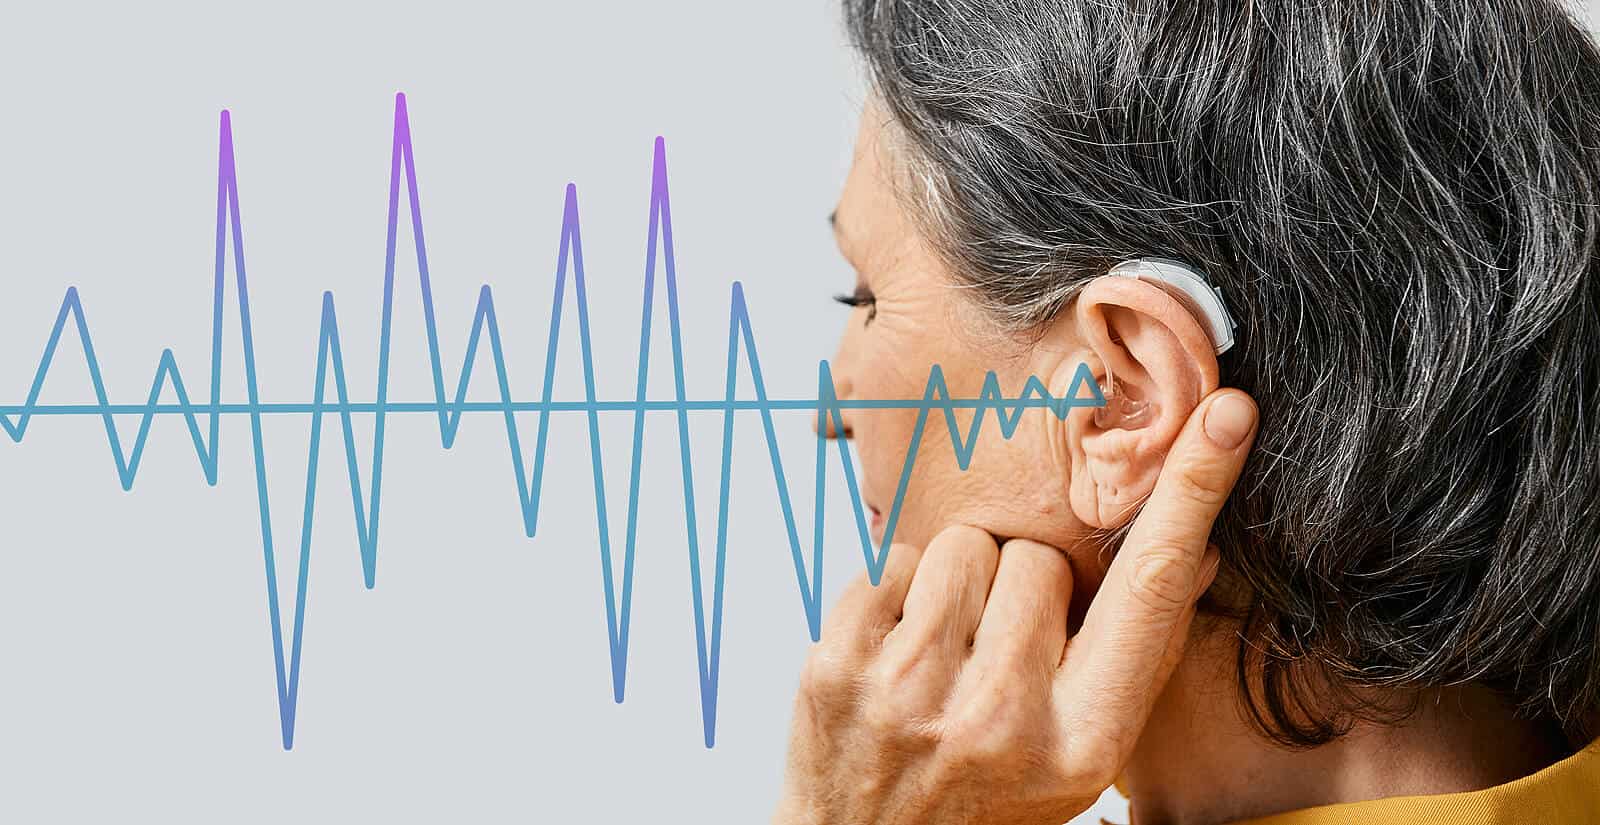 Senior woman wearing hearing aid and holding finger against ear